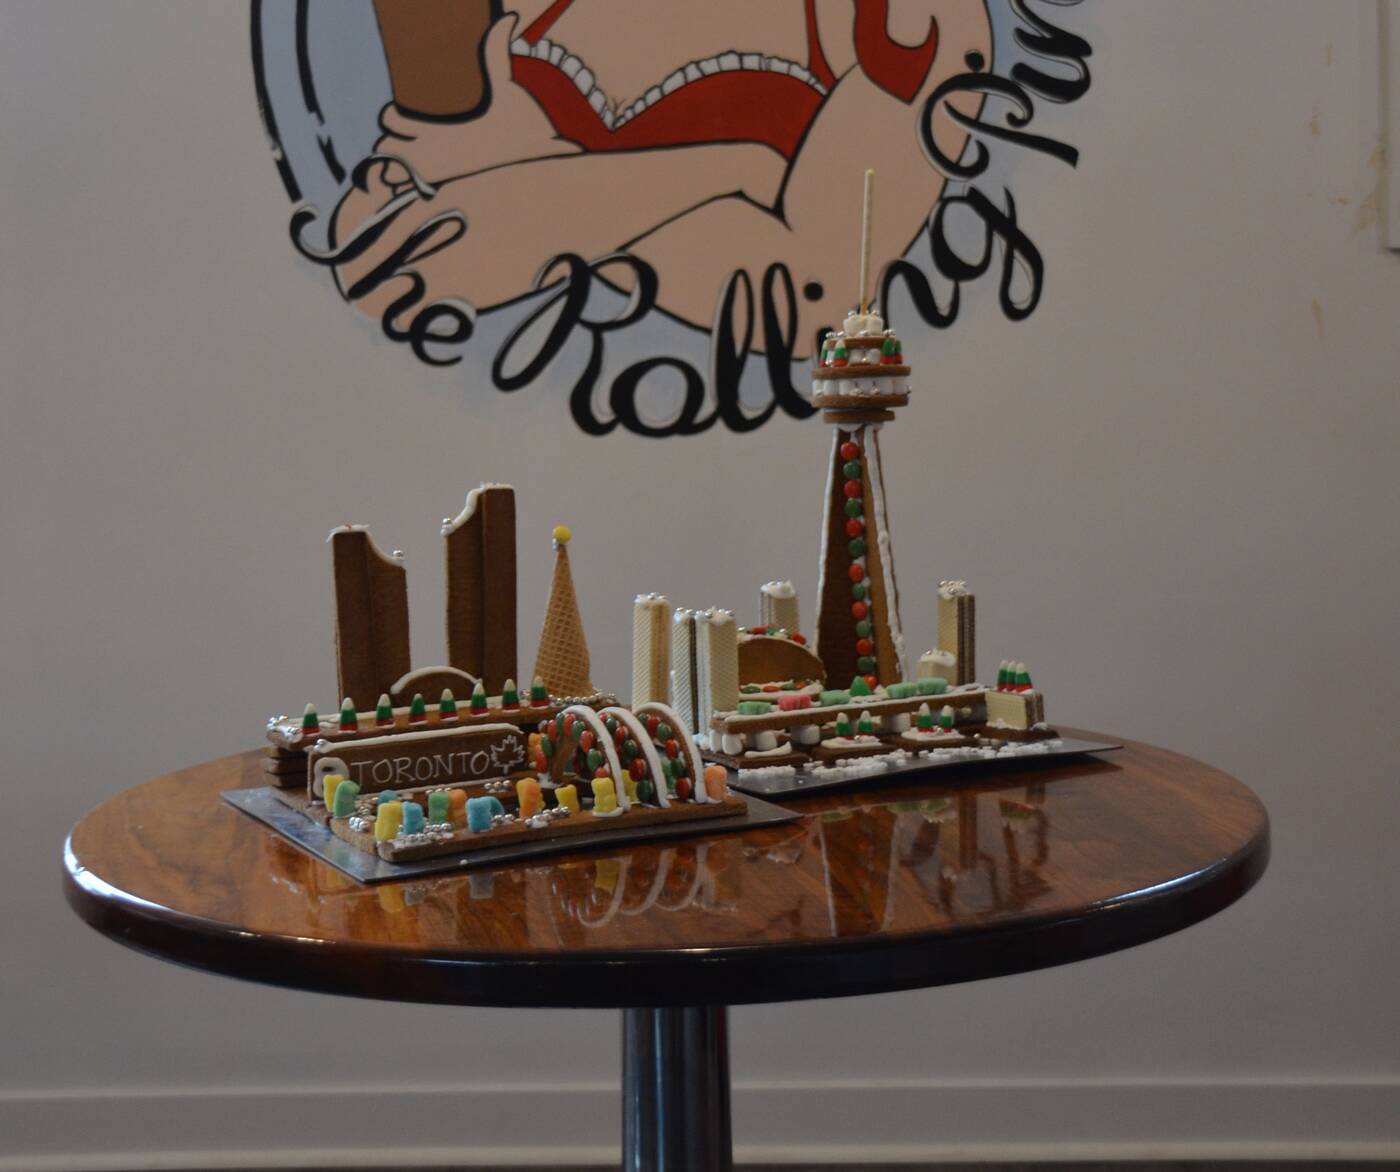 Now you can construct edible fashions of Toronto designed by in style architects